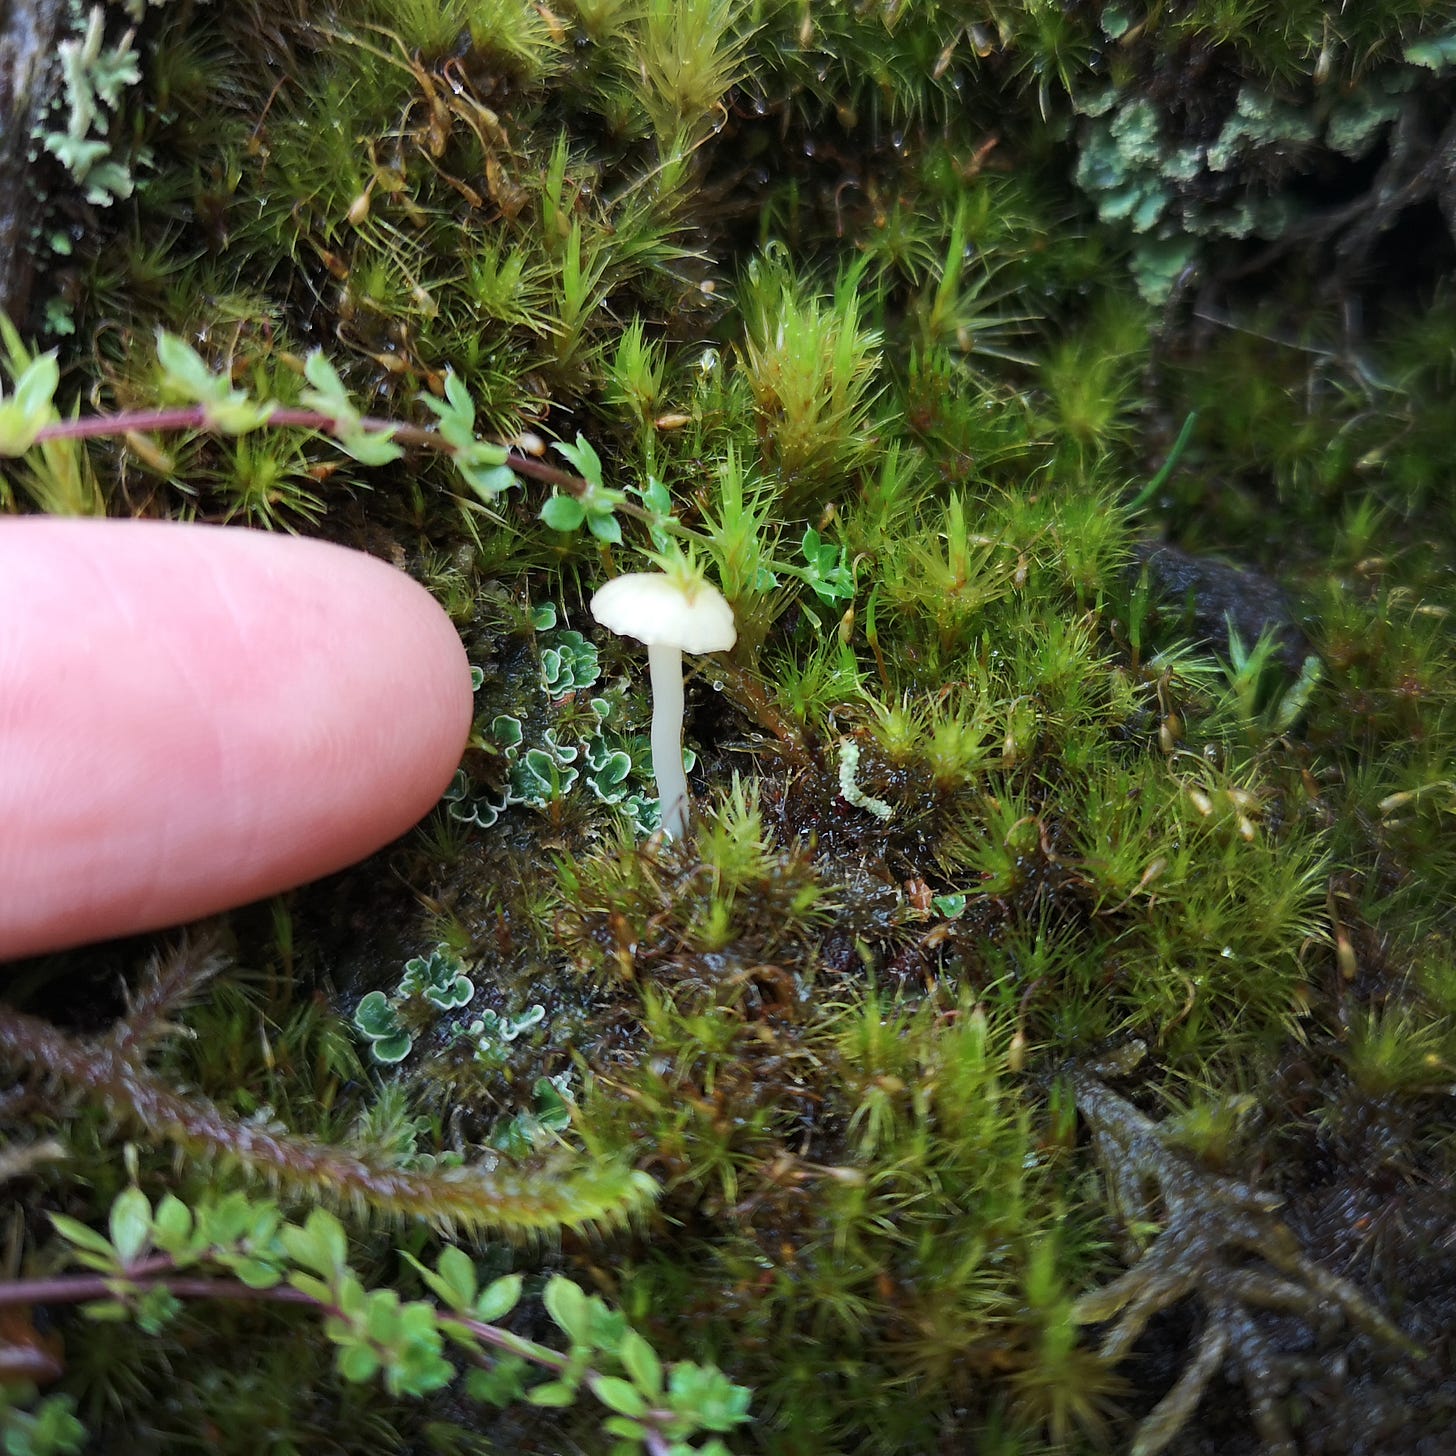 Image description: a white person's fingertip points at the tiniest white mushroom, only as high and the finger is wide. My glee is not pictured but I'm sure you can imagine!